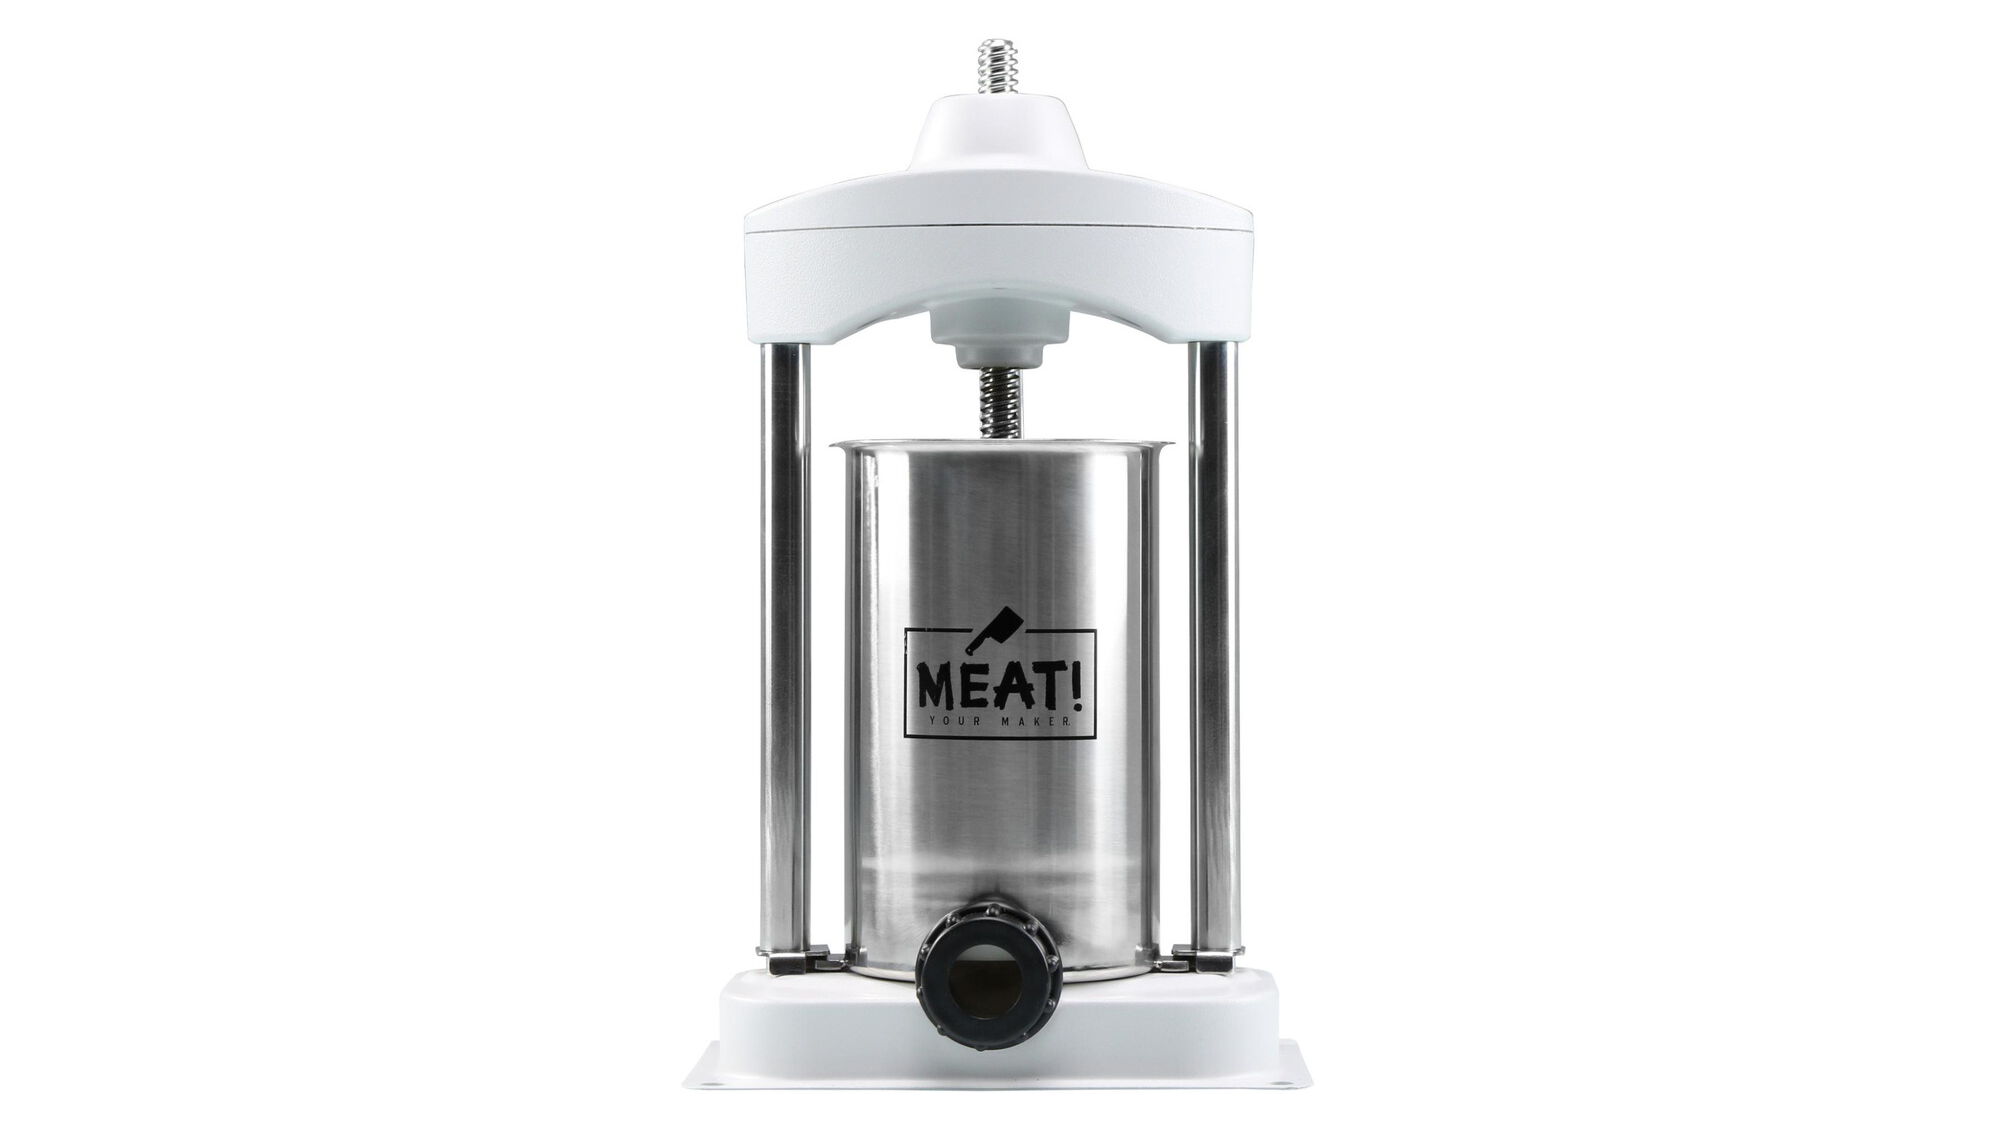 Meat 5 lb Sausage Stuffer - Food Processing at Academy Sports